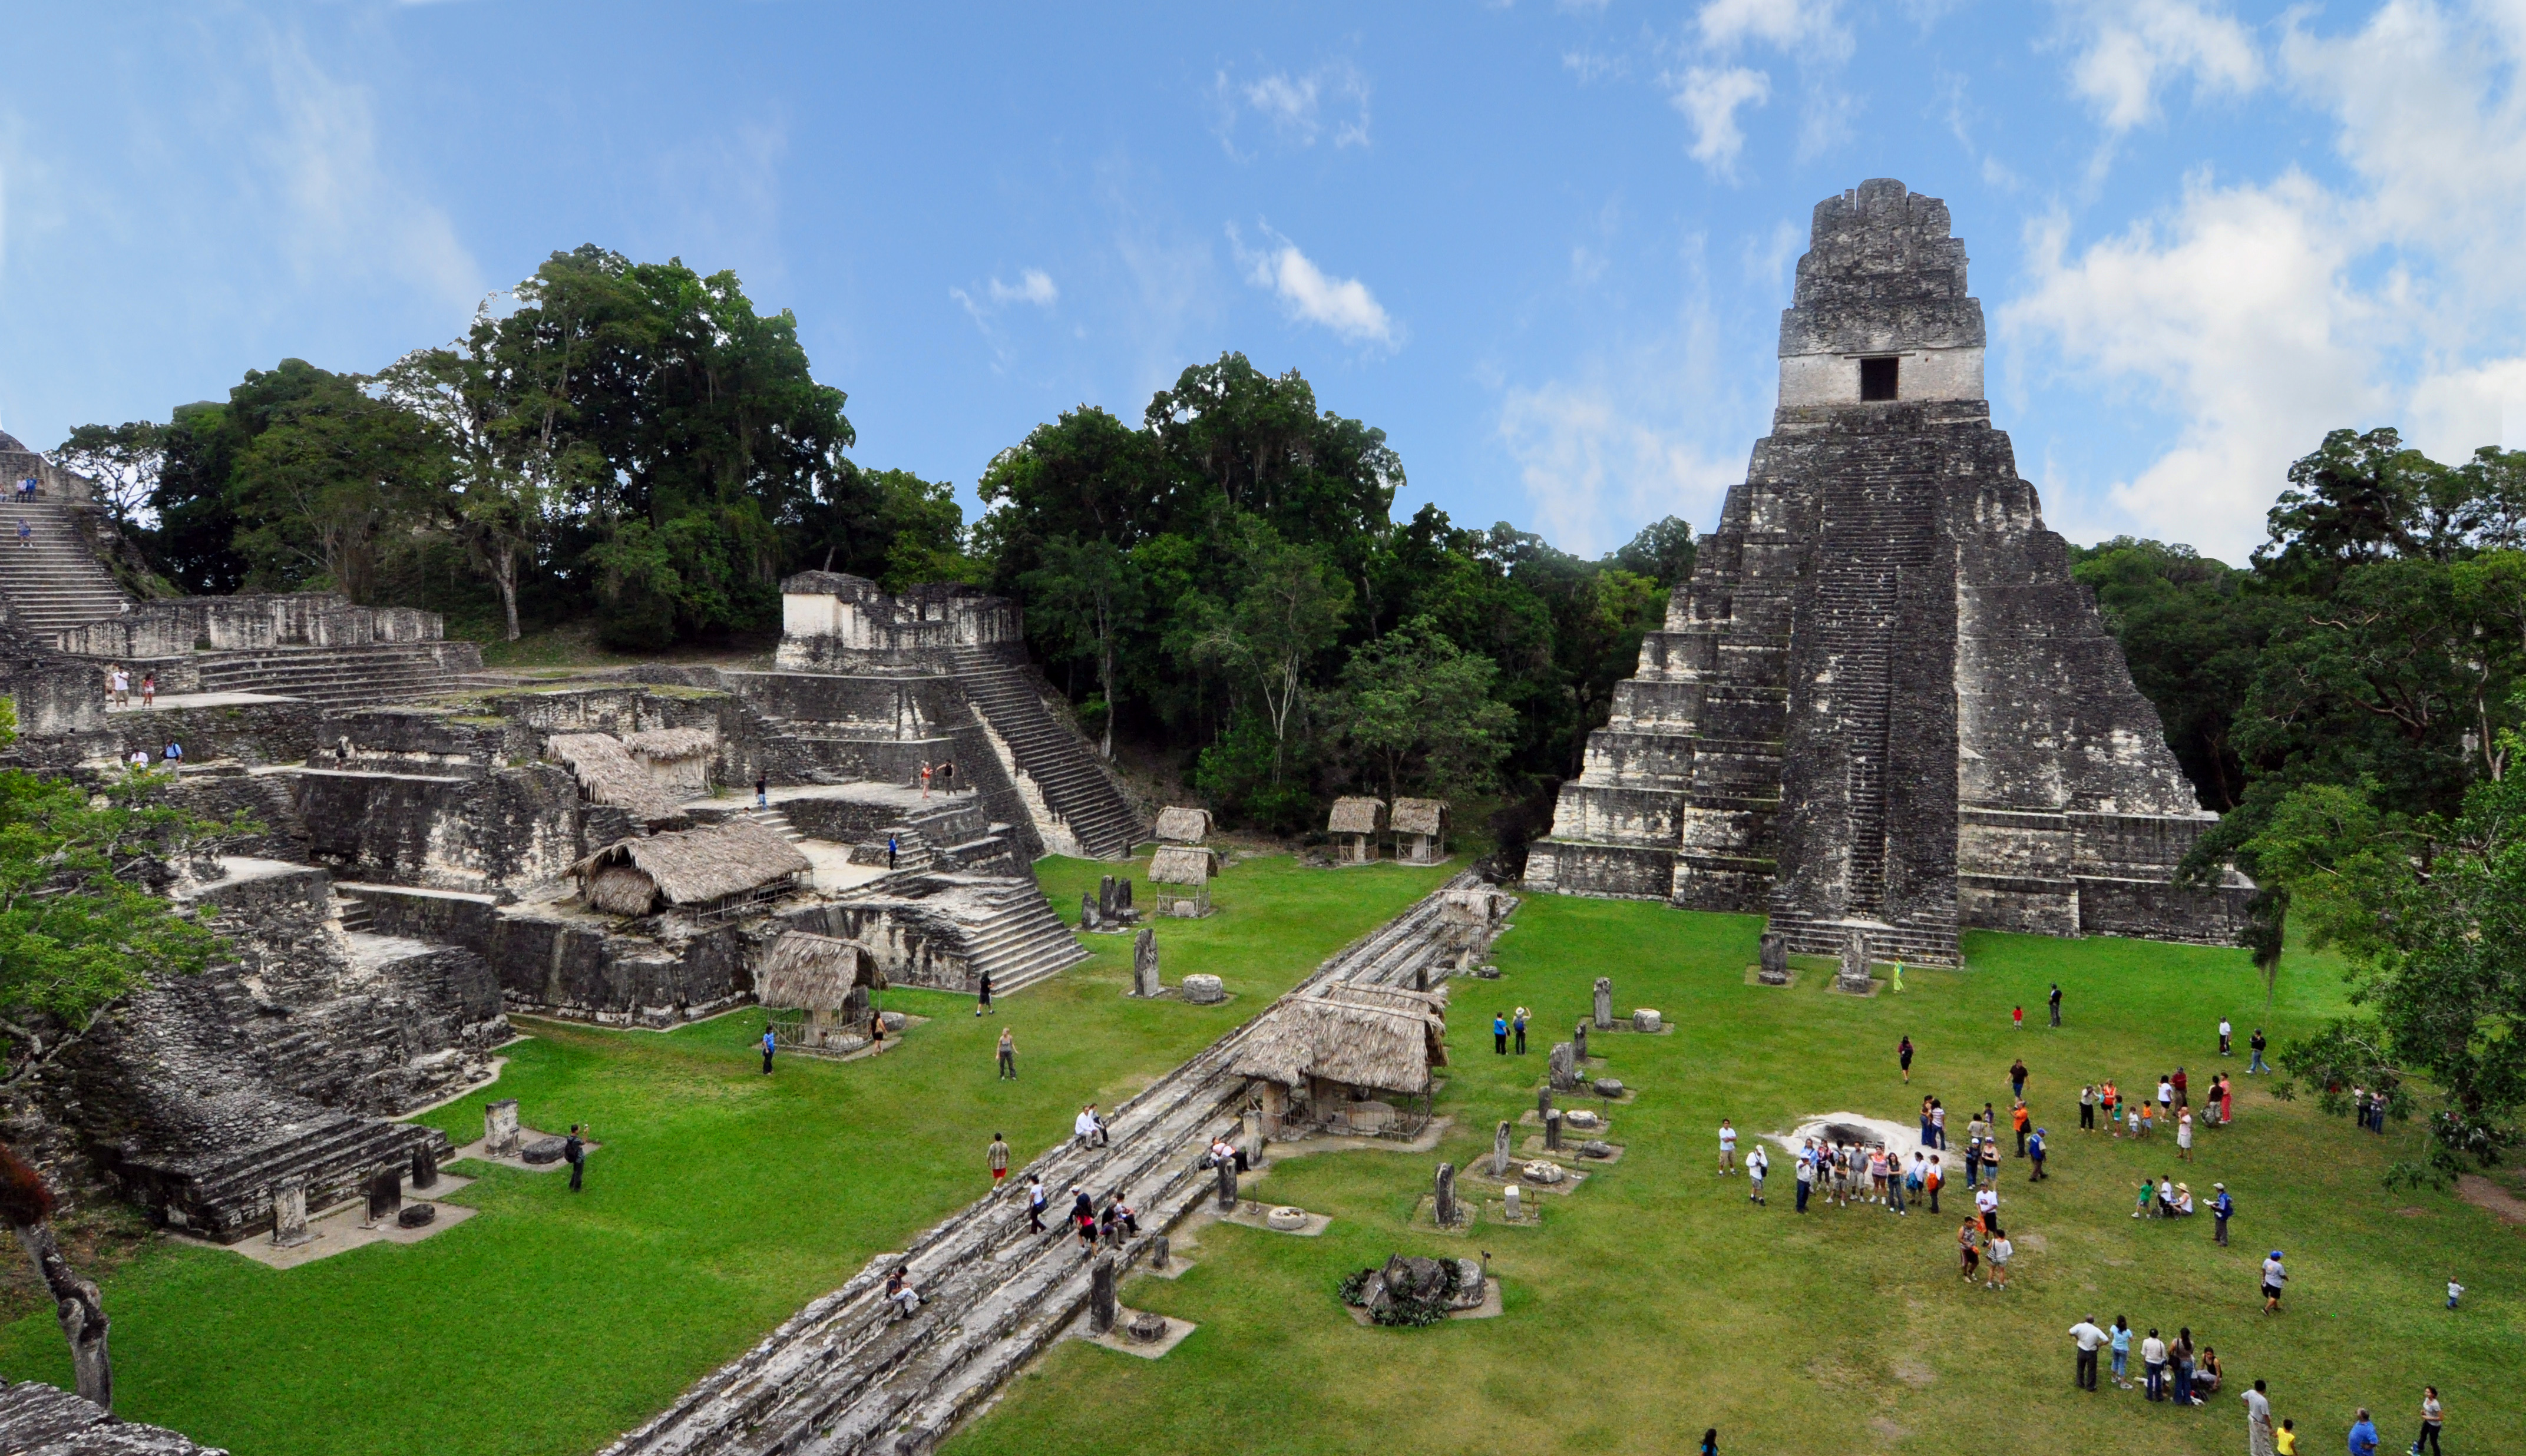 Heart of the Mayan World, Archaeological Site of Tikal